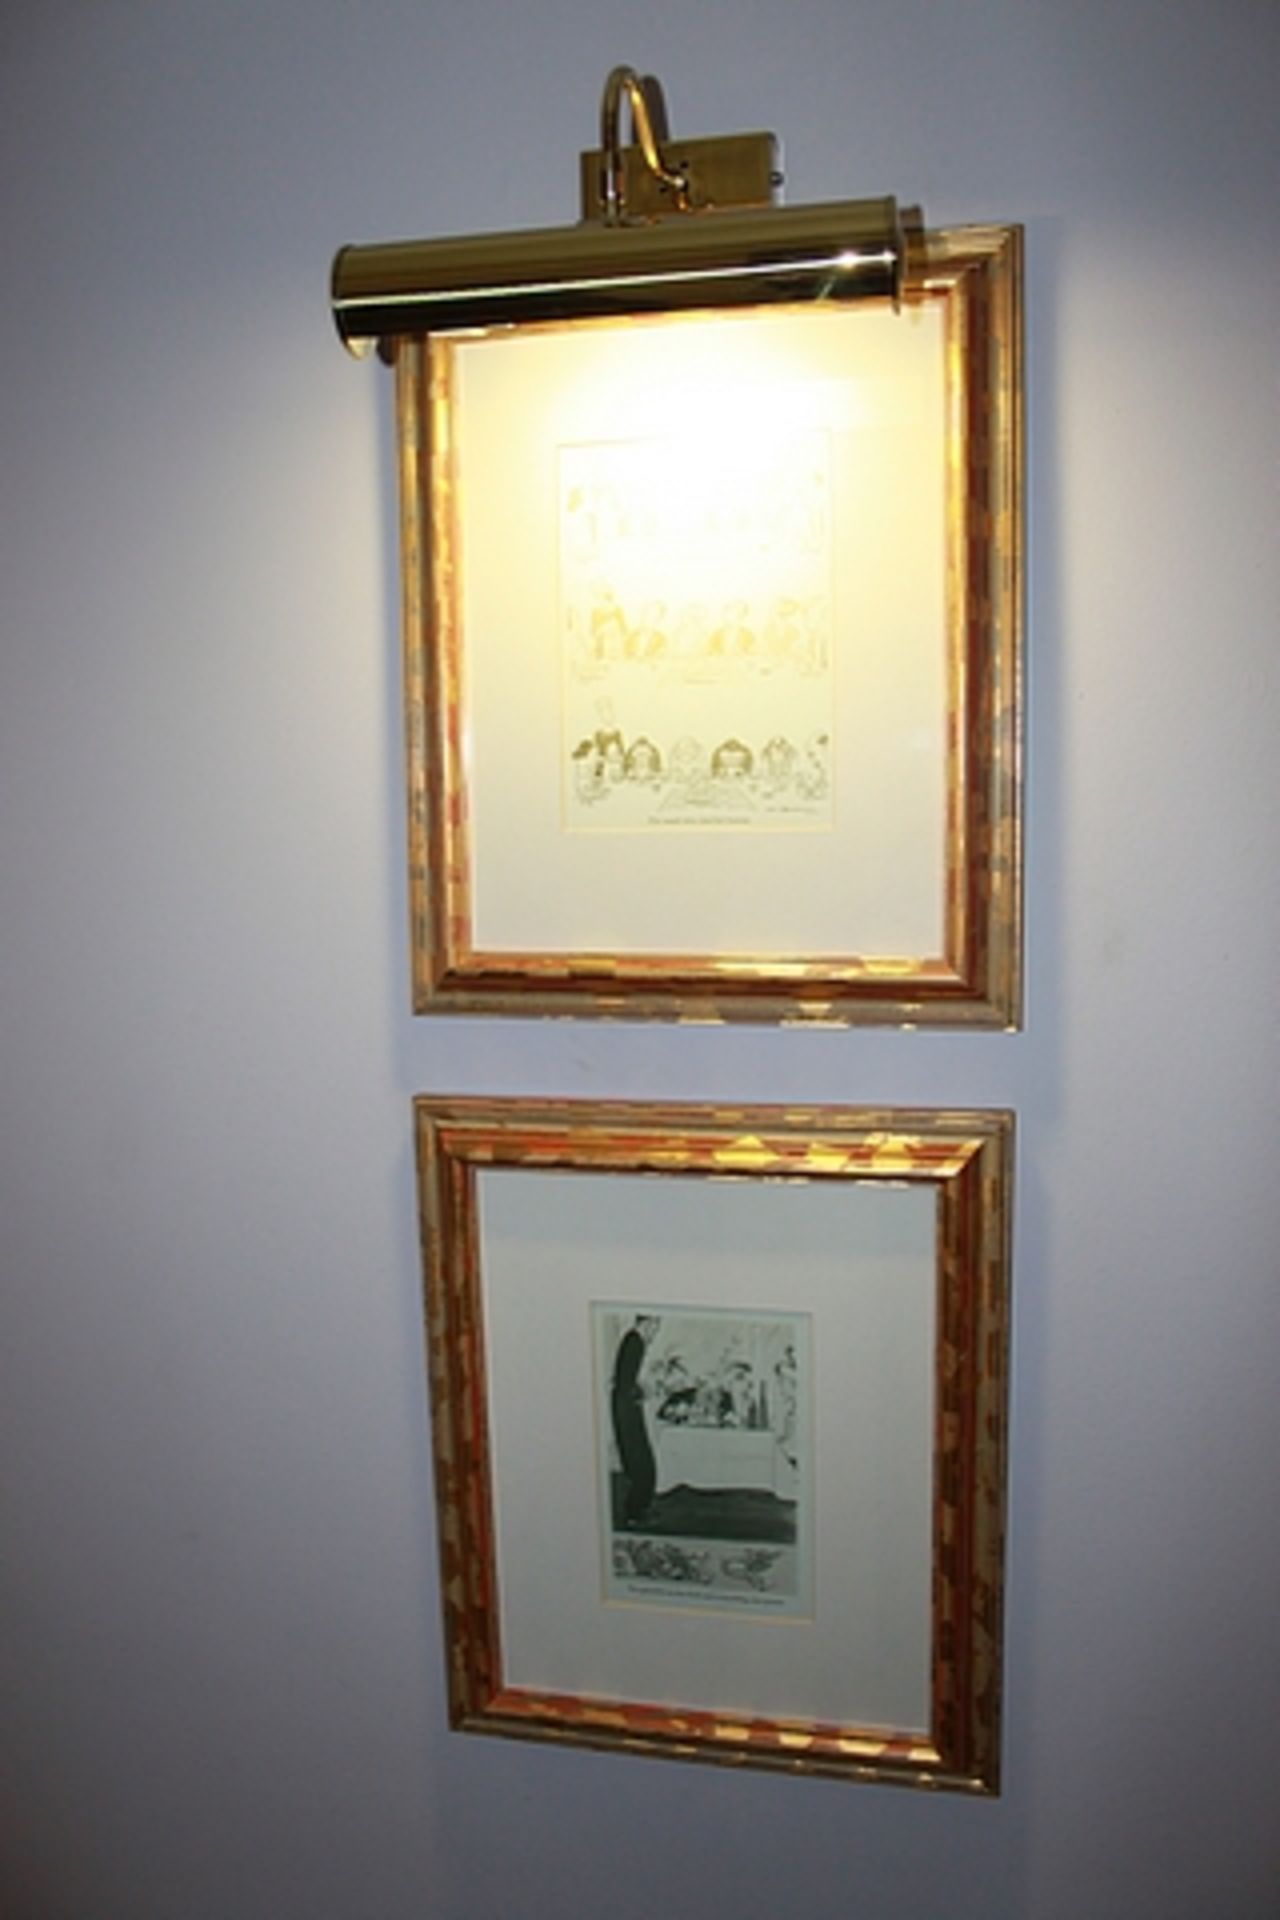 A set of 3 framed HM Bateman vintage humorous prints The Maid Who Was But Human, The grumble-at-